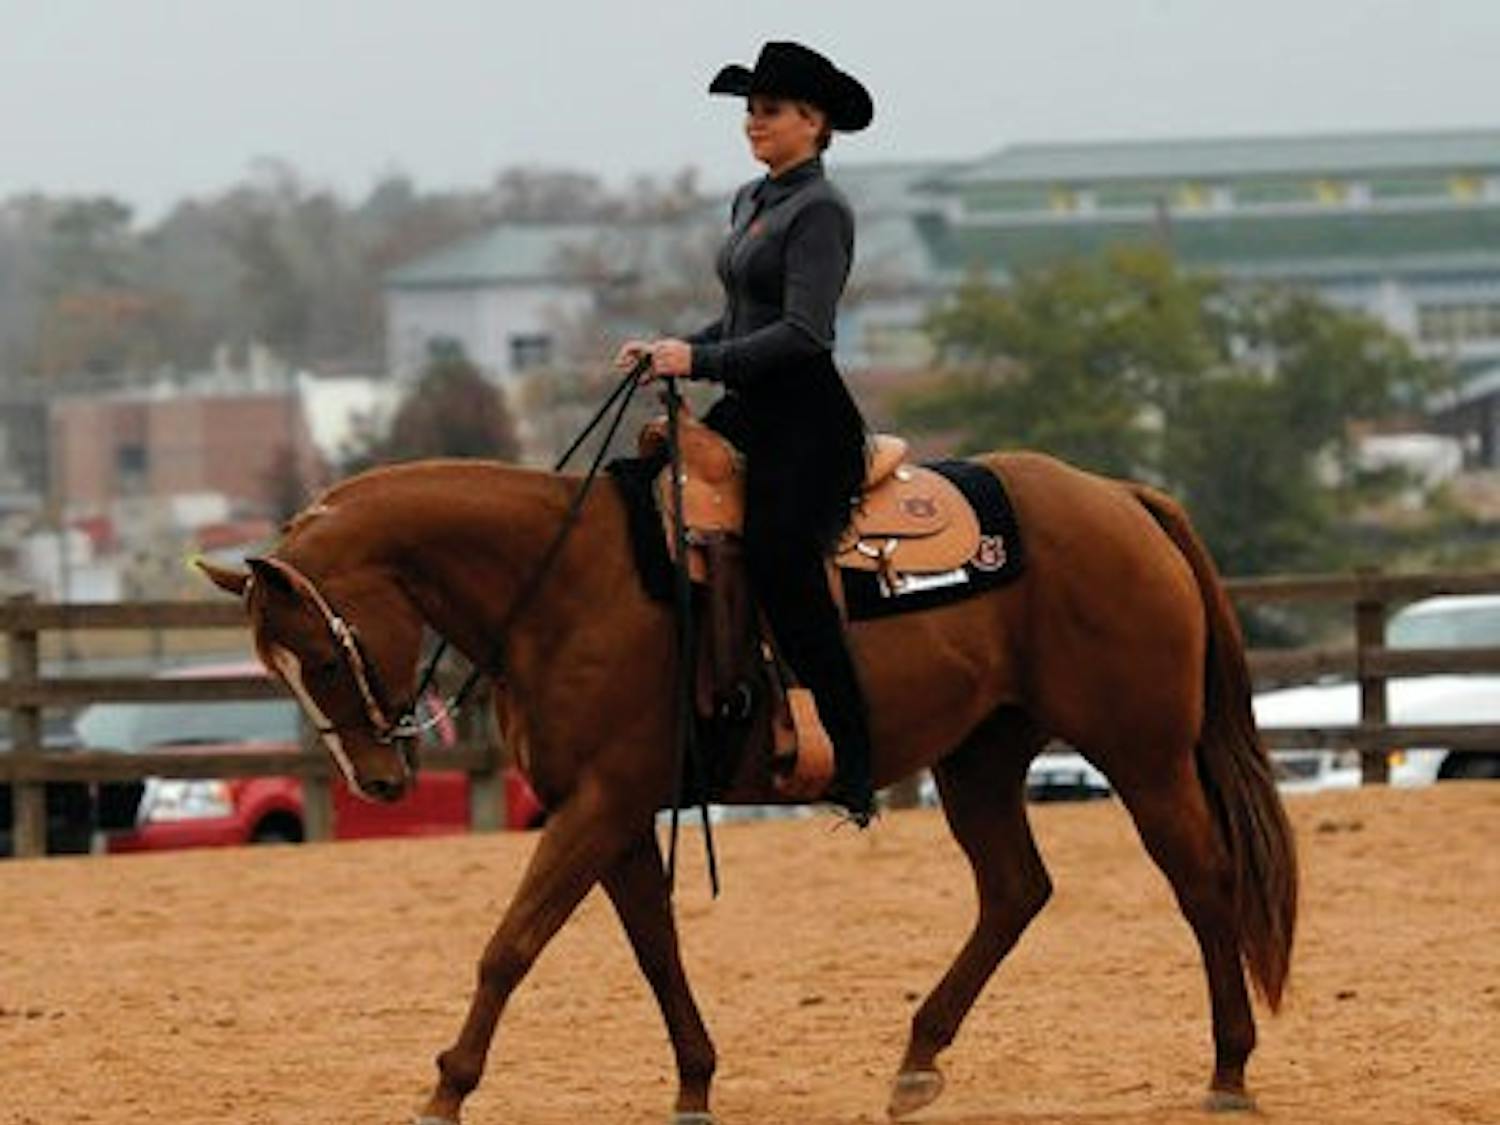 Senior Lucy Igoe, Western rider for the Tigers, wants to challenge for the National Collegiate Equestrian Association title in her final season.